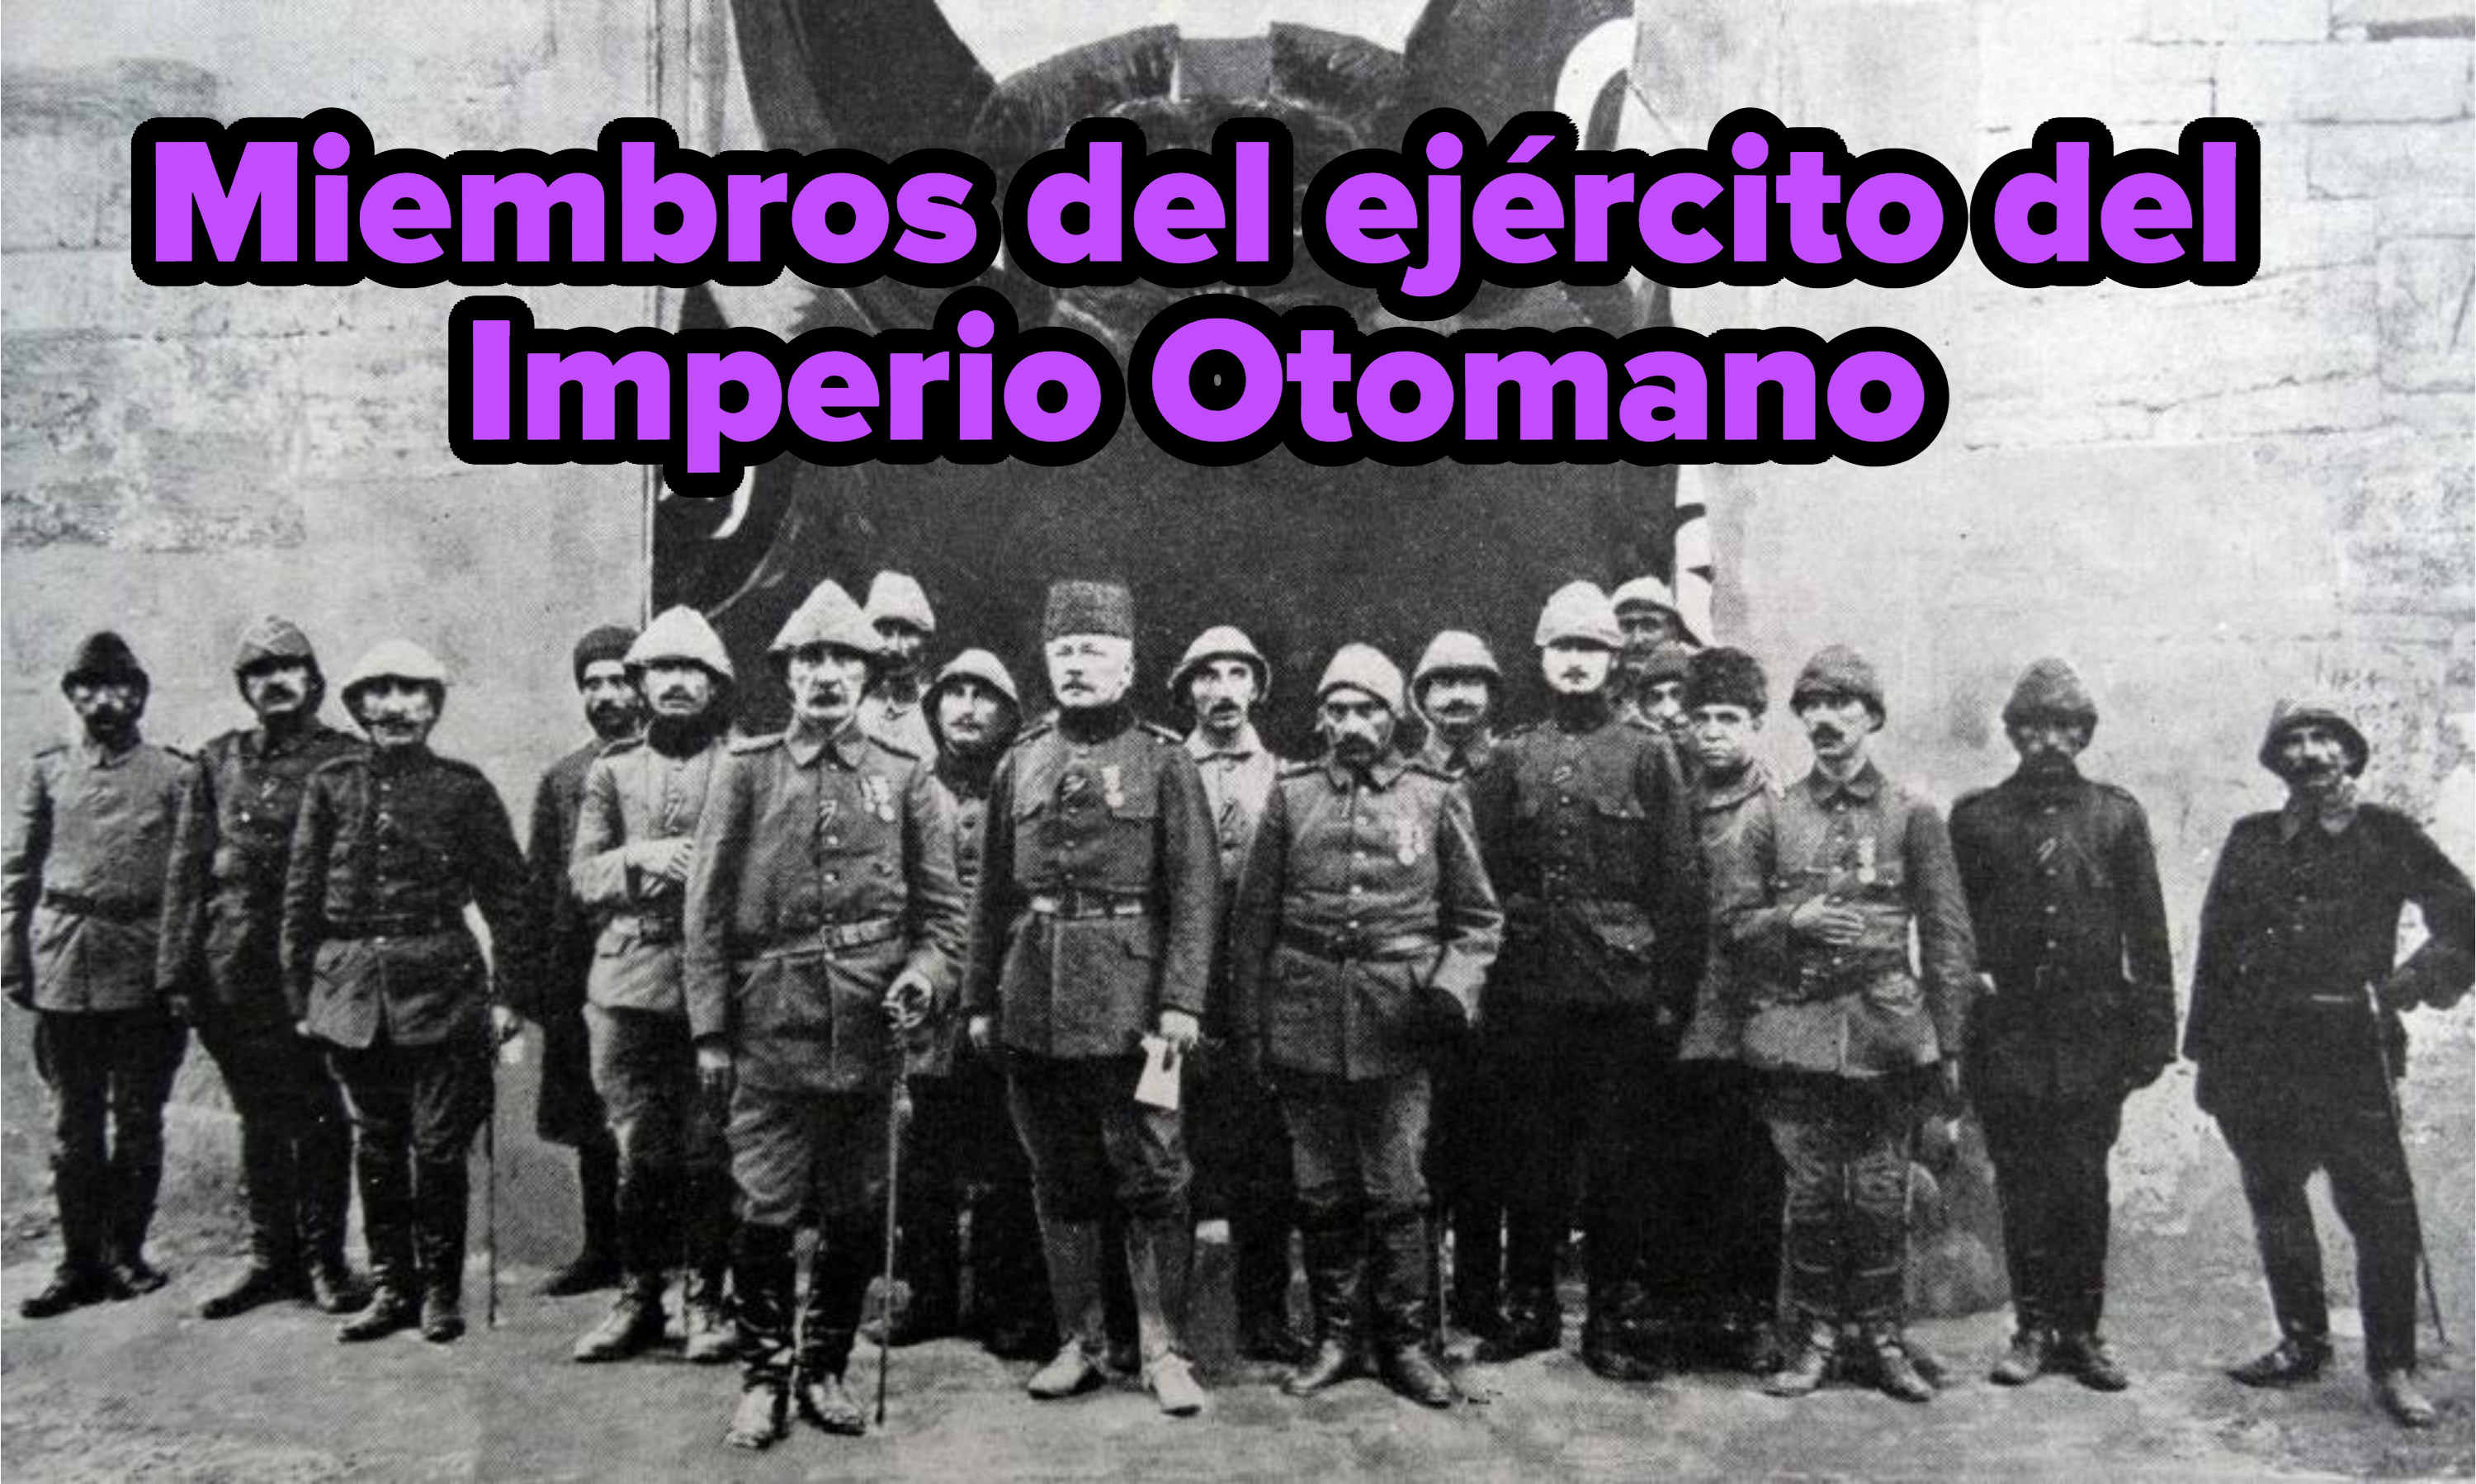 A photograph of members of the military of the Ottoman Empire